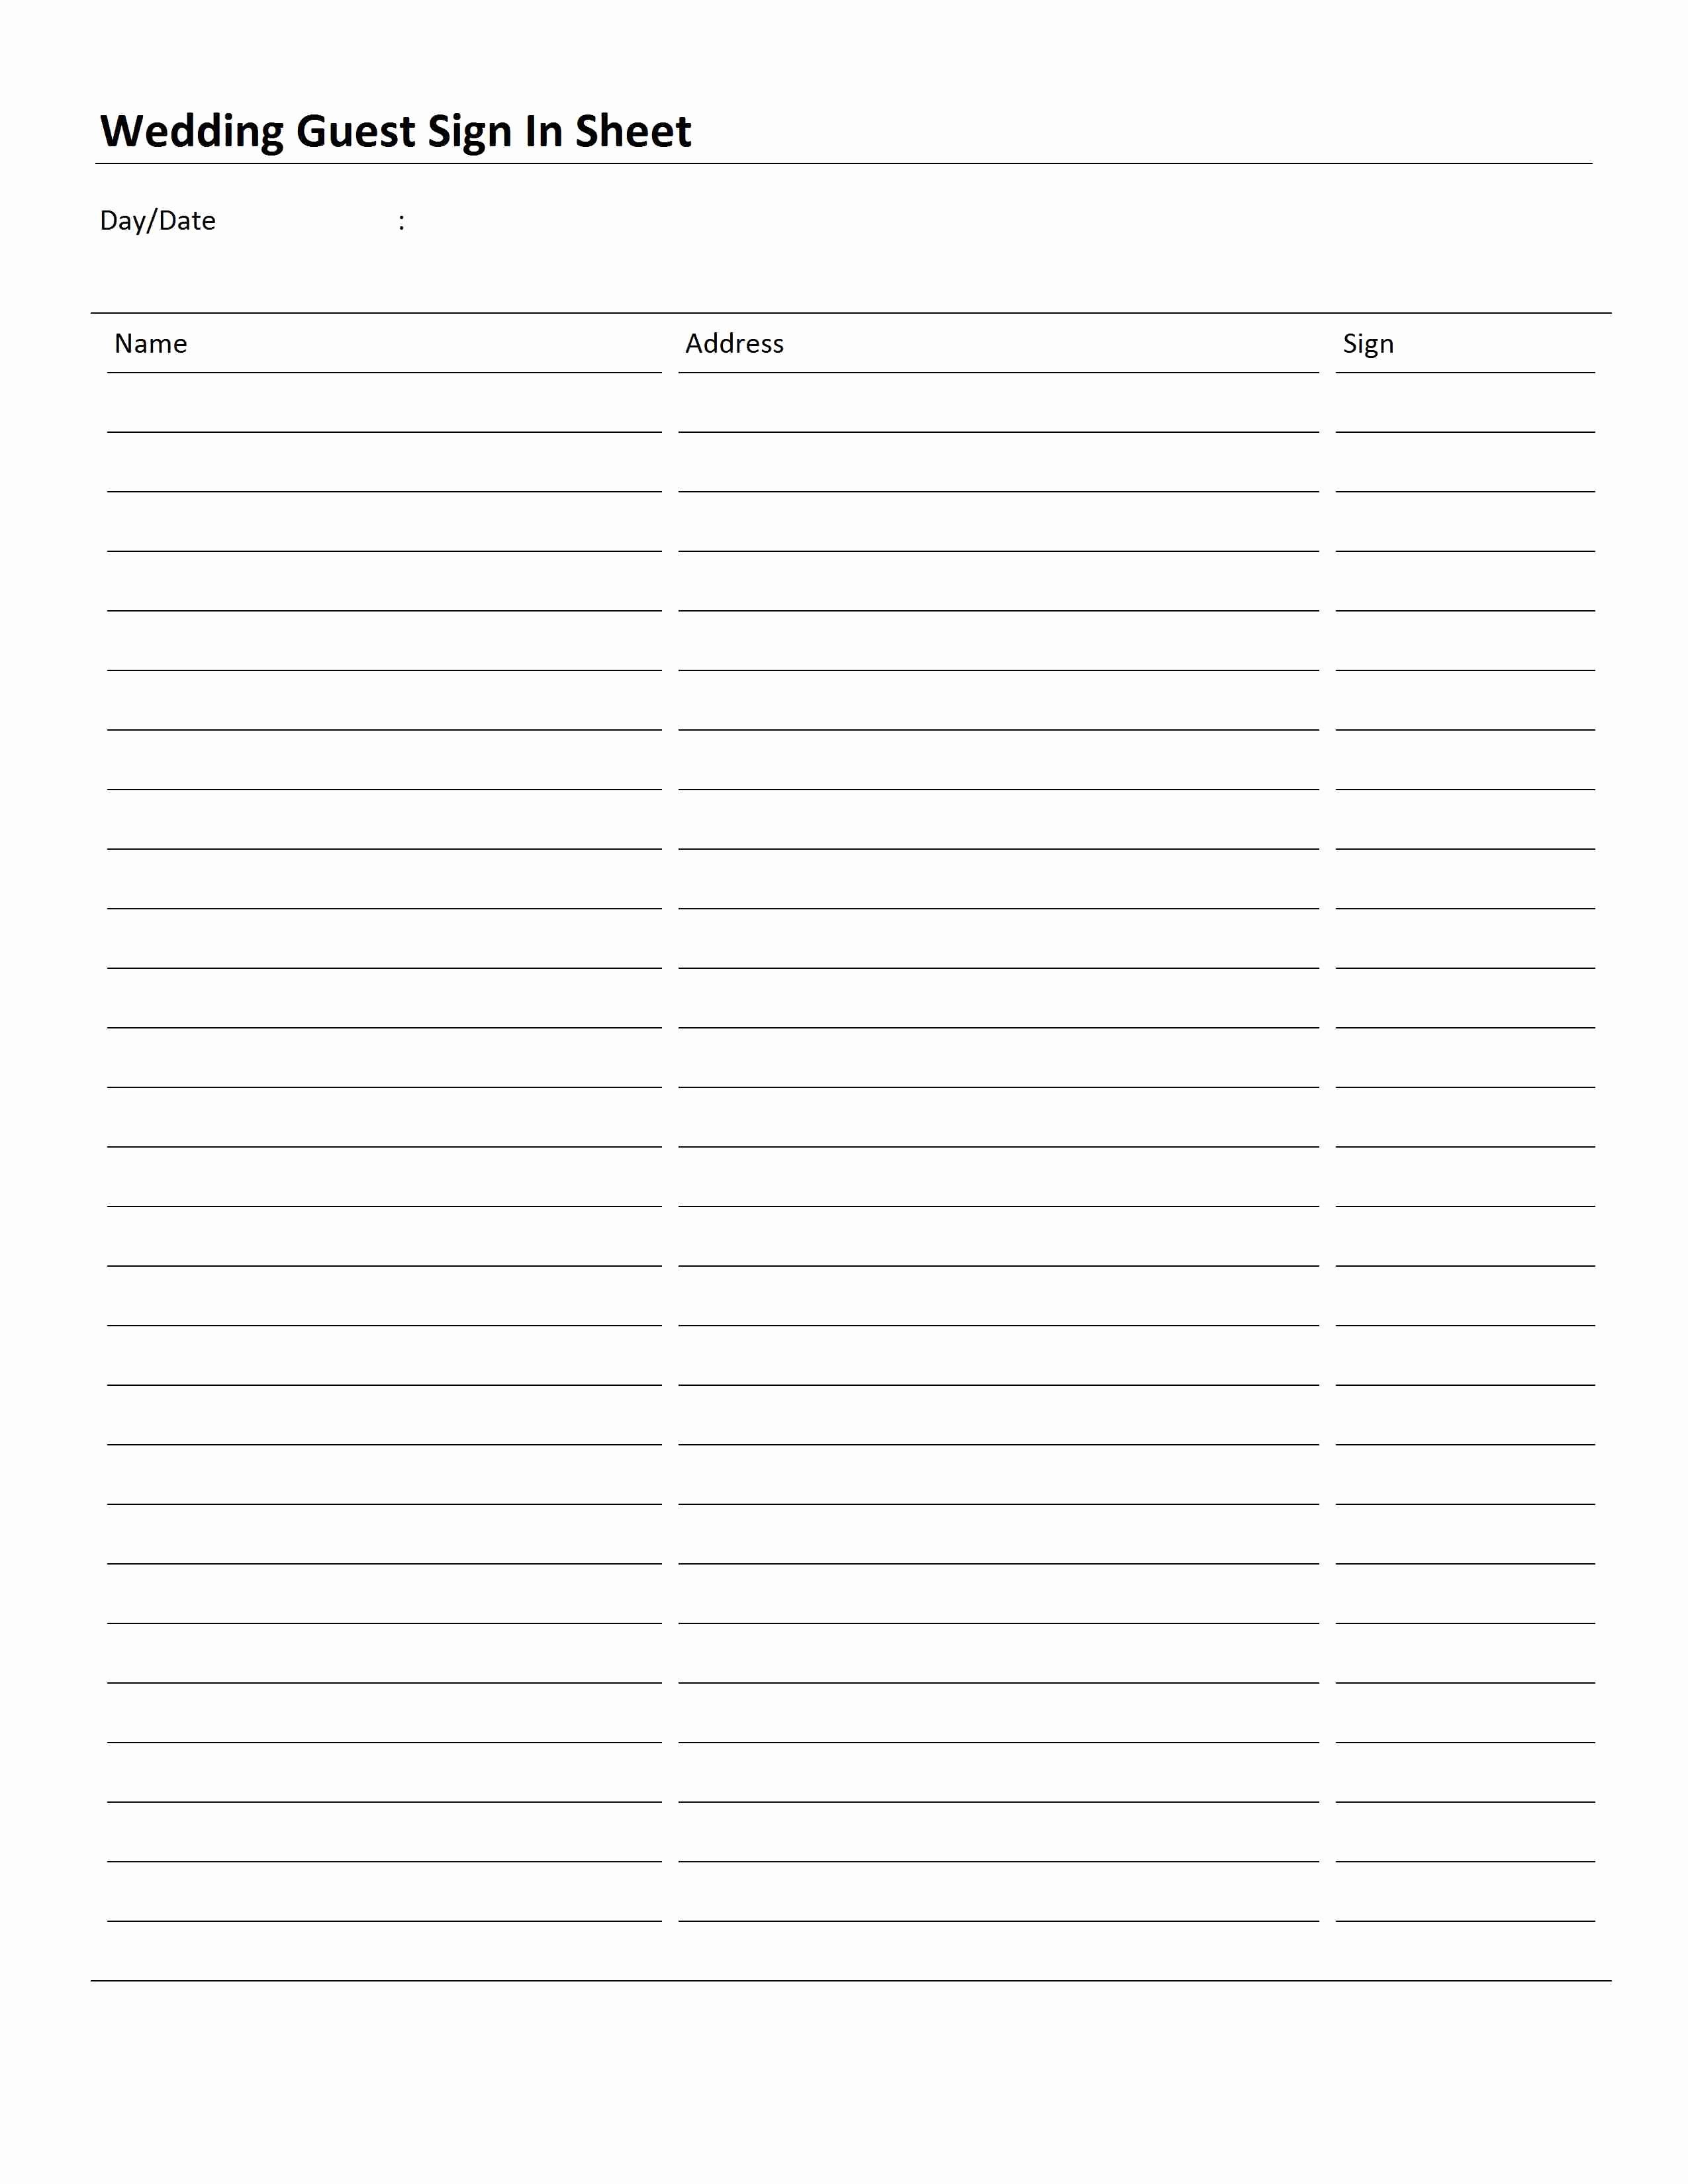 Guest Sign In Sheet Templates Luxury Sign In Archives Page 2 Of 2